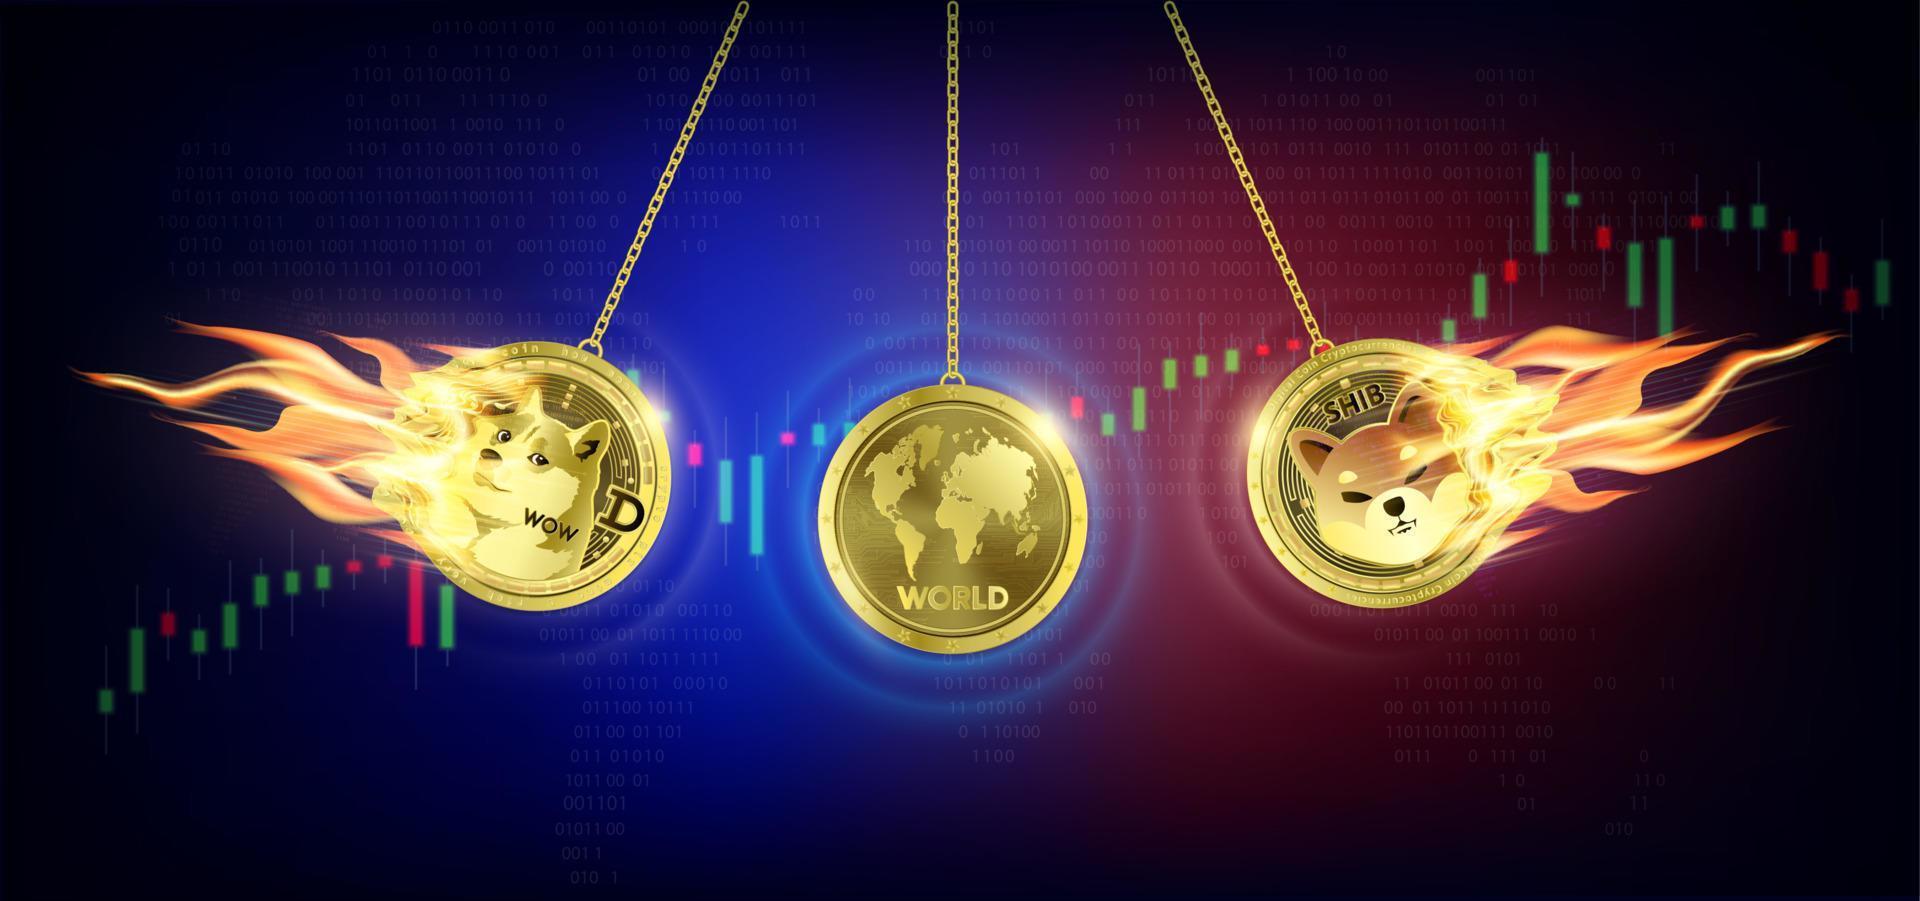 Pendulum gold coin Dogecoin and Shiba inu motion bumps world. Crypto currency. Stock market growth competition Big data information mining technology. Internet electronic payment futuristic. 3D vector